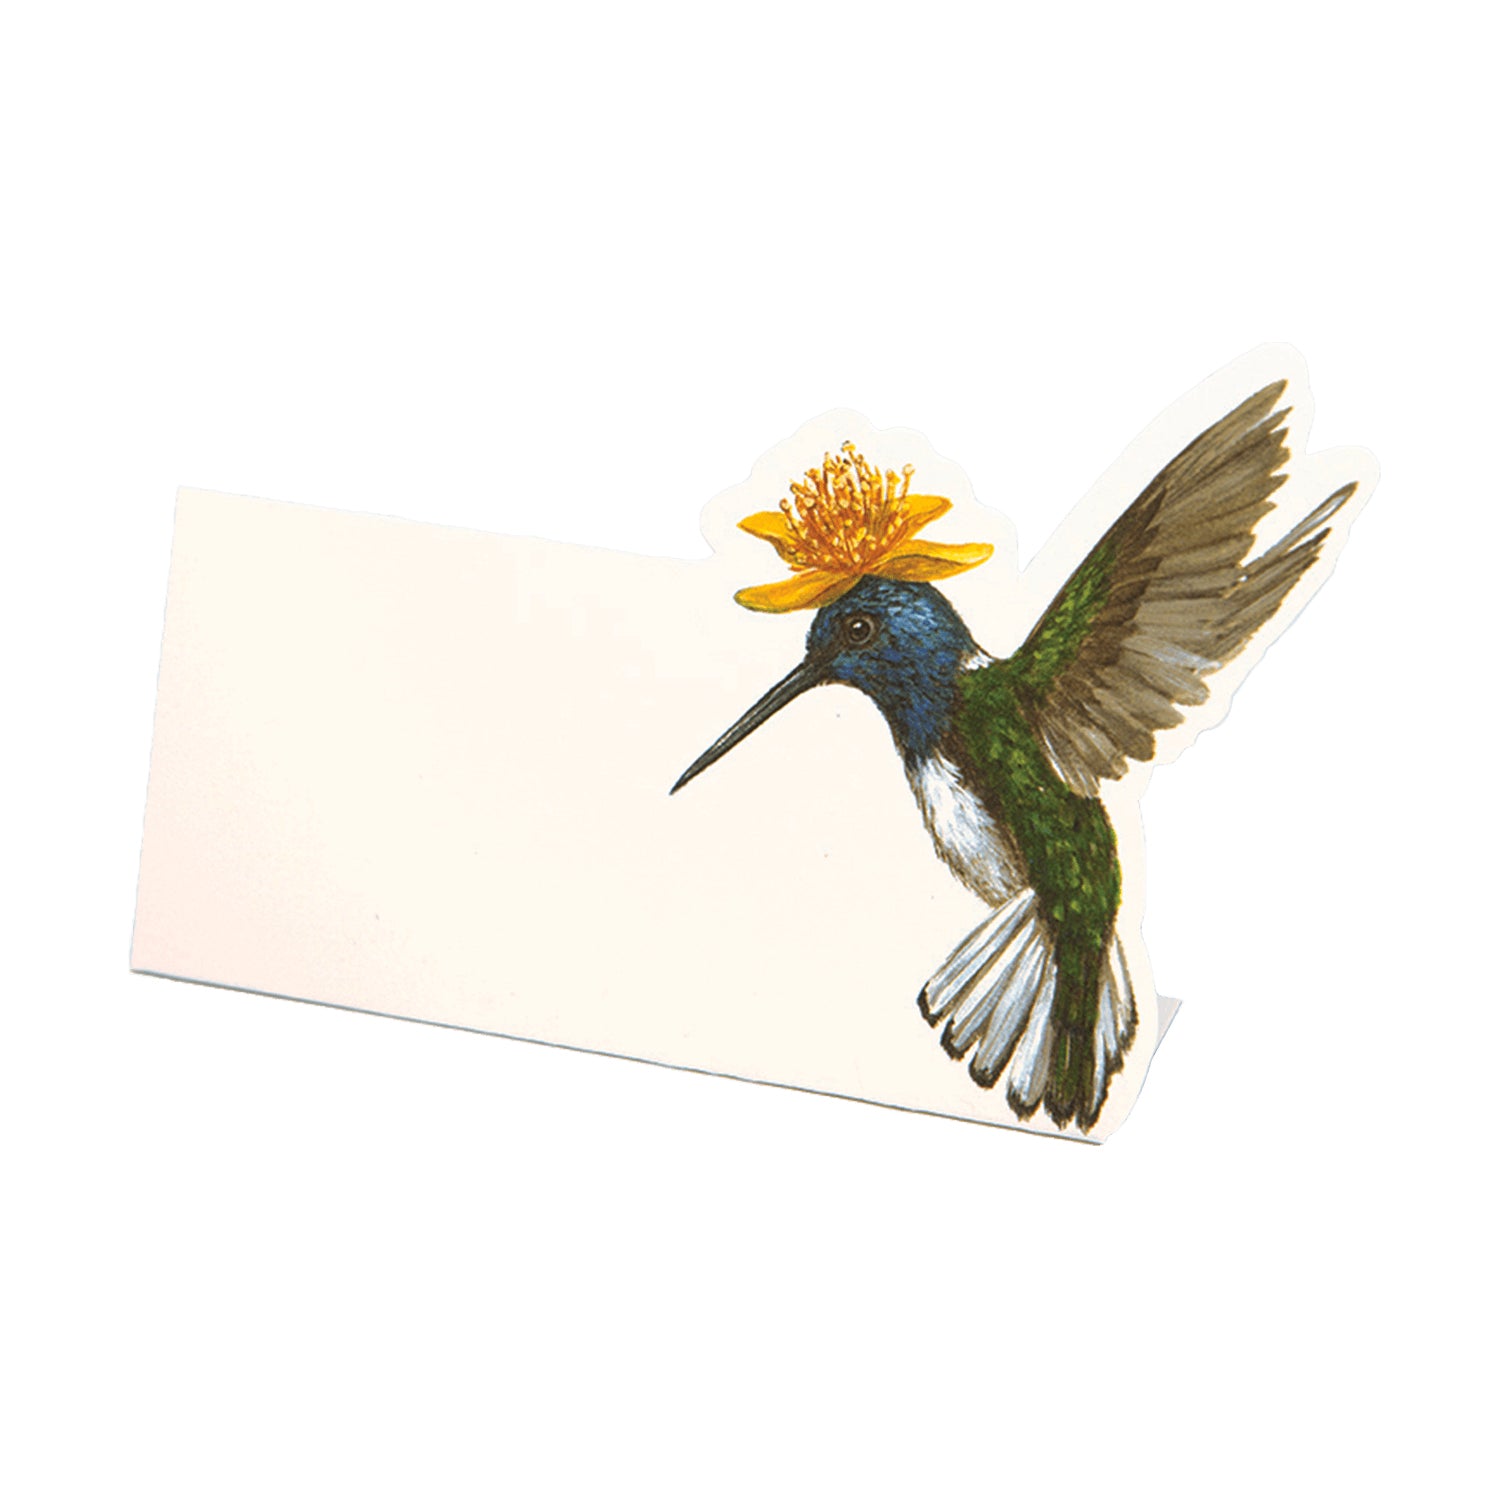 A white, rectangle, freestanding place card featuring an illustrated hummingbird in flight with a yellow blossom on its head adorning the right side of the card.